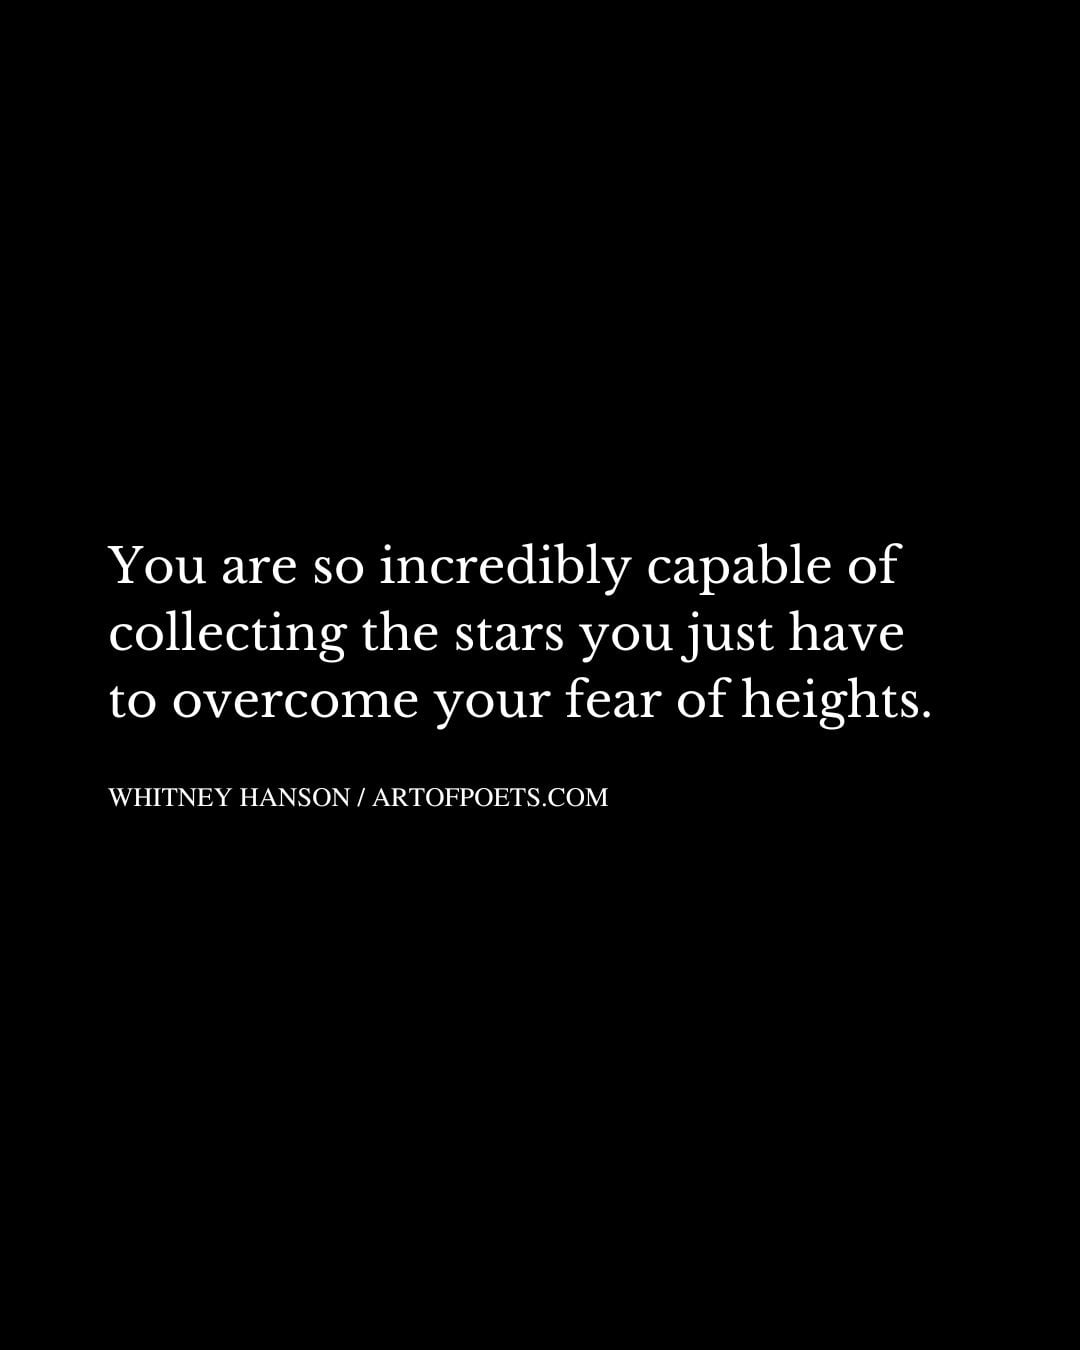 You are so incredibly capable of collecting the stars you just have to overcome your fear of heights